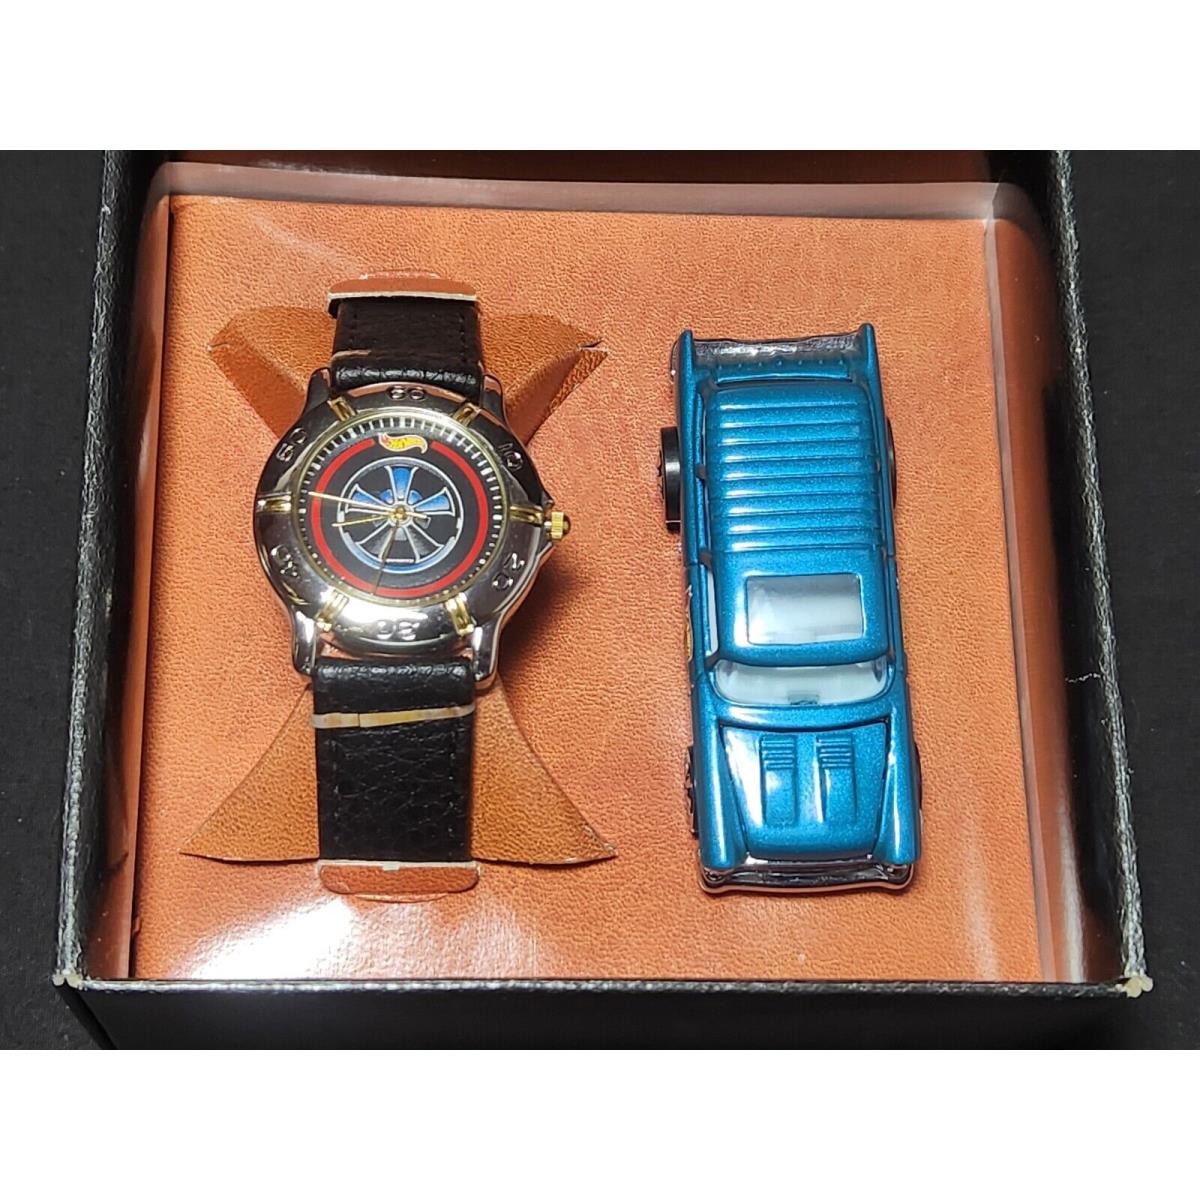 Vintage 1998 Hot Wheels Collectibles Watch Car Set 1955 Chevy Nomad 1 of 5000